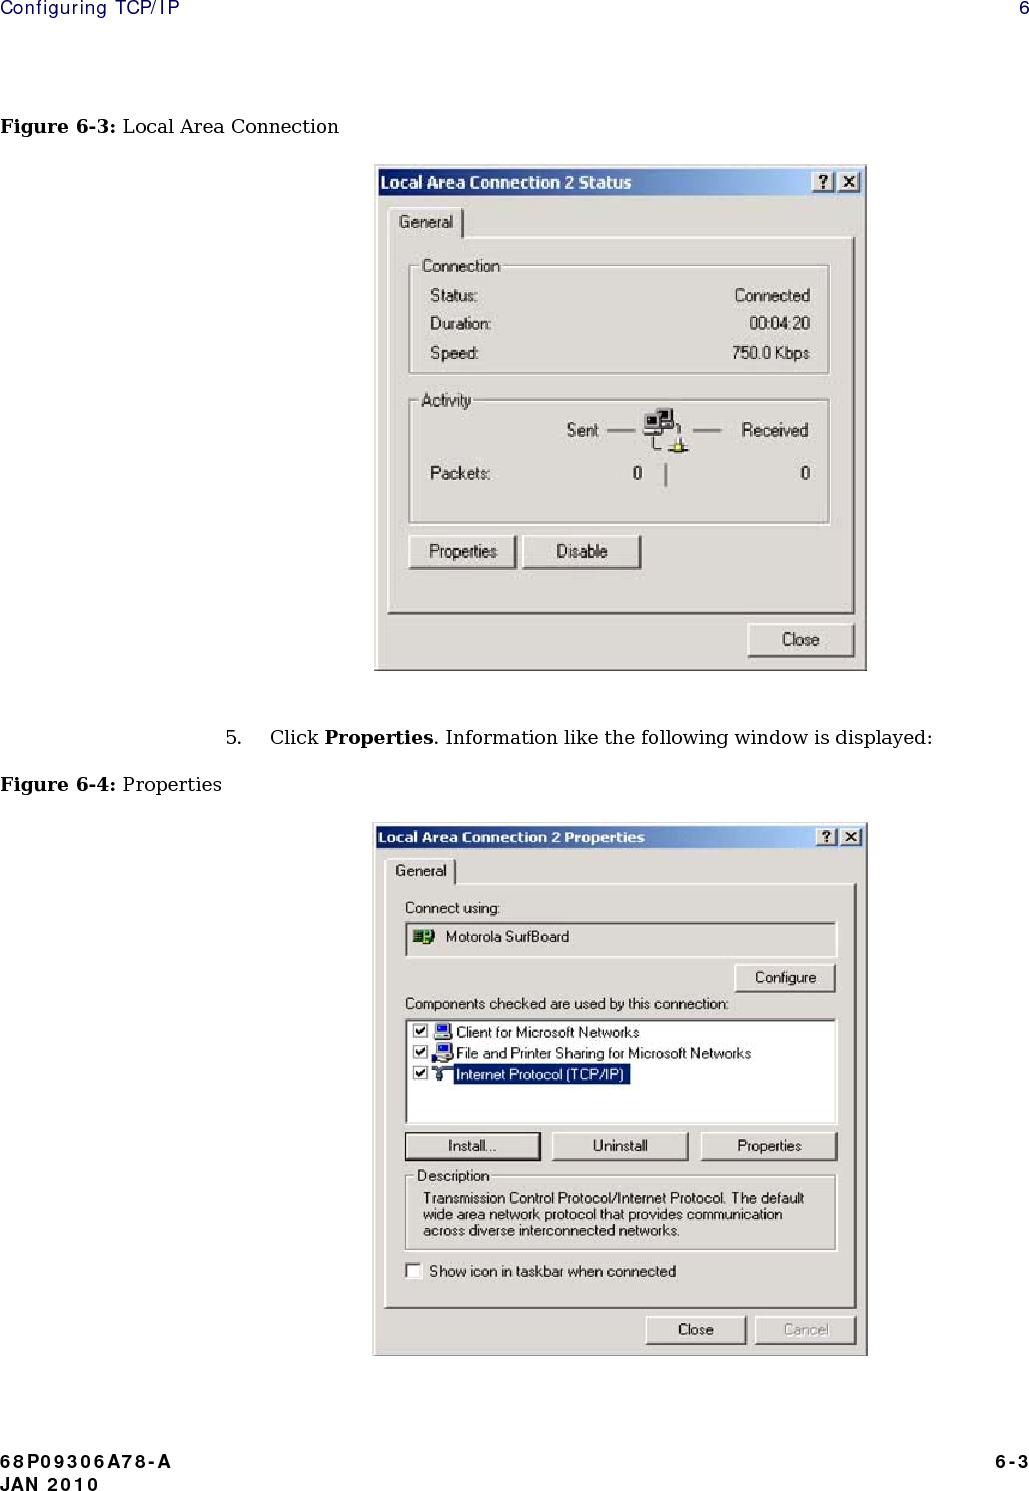 Configuring TCP/IP    6 Figure 6-3: Local Area Connection                                  5. Click Properties. Information like the following window is displayed: Figure 6-4: Properties                           68P09306A78-A   6-3 JAN 2010 